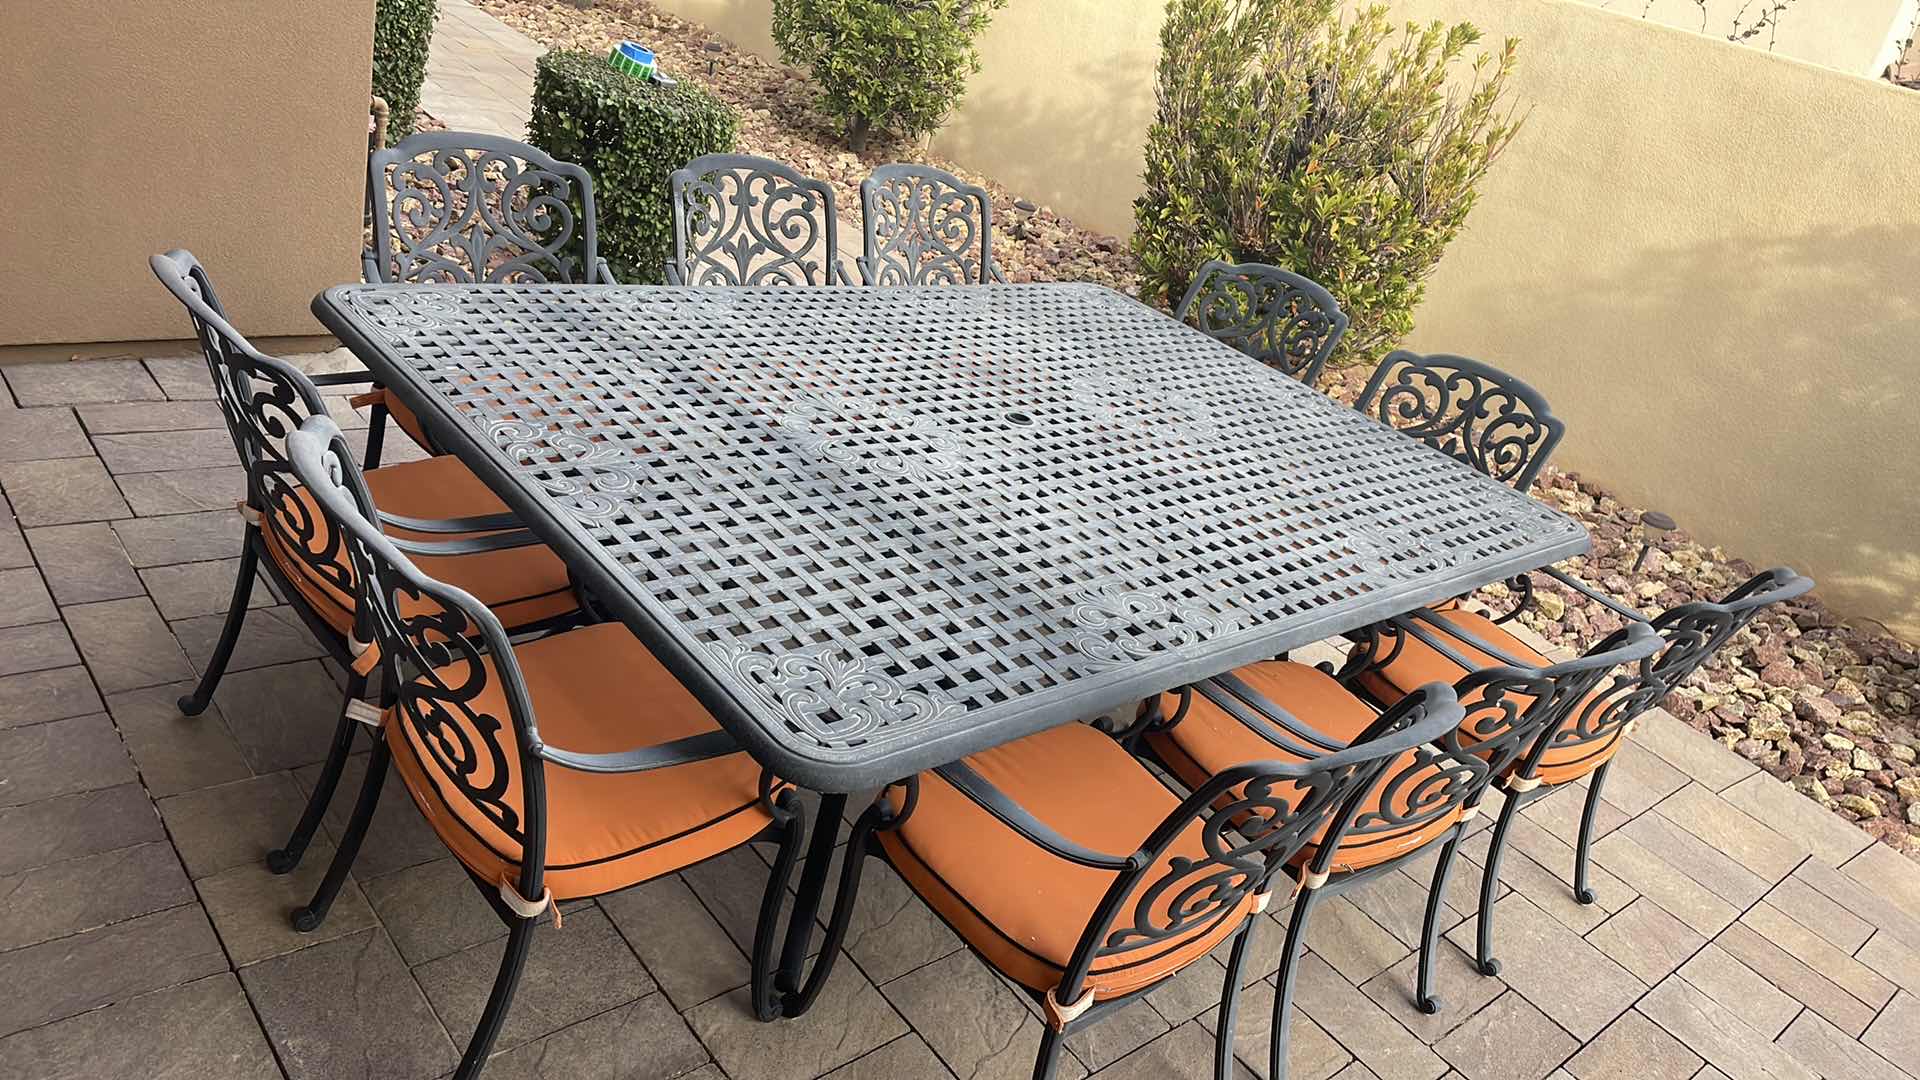 Photo 3 of LUXURY PATIO FURNITURE SET - TABLE 64” X 90” WITH 10 CHAIRS ORANGE CUSHIONS WITH BLACK WELTING